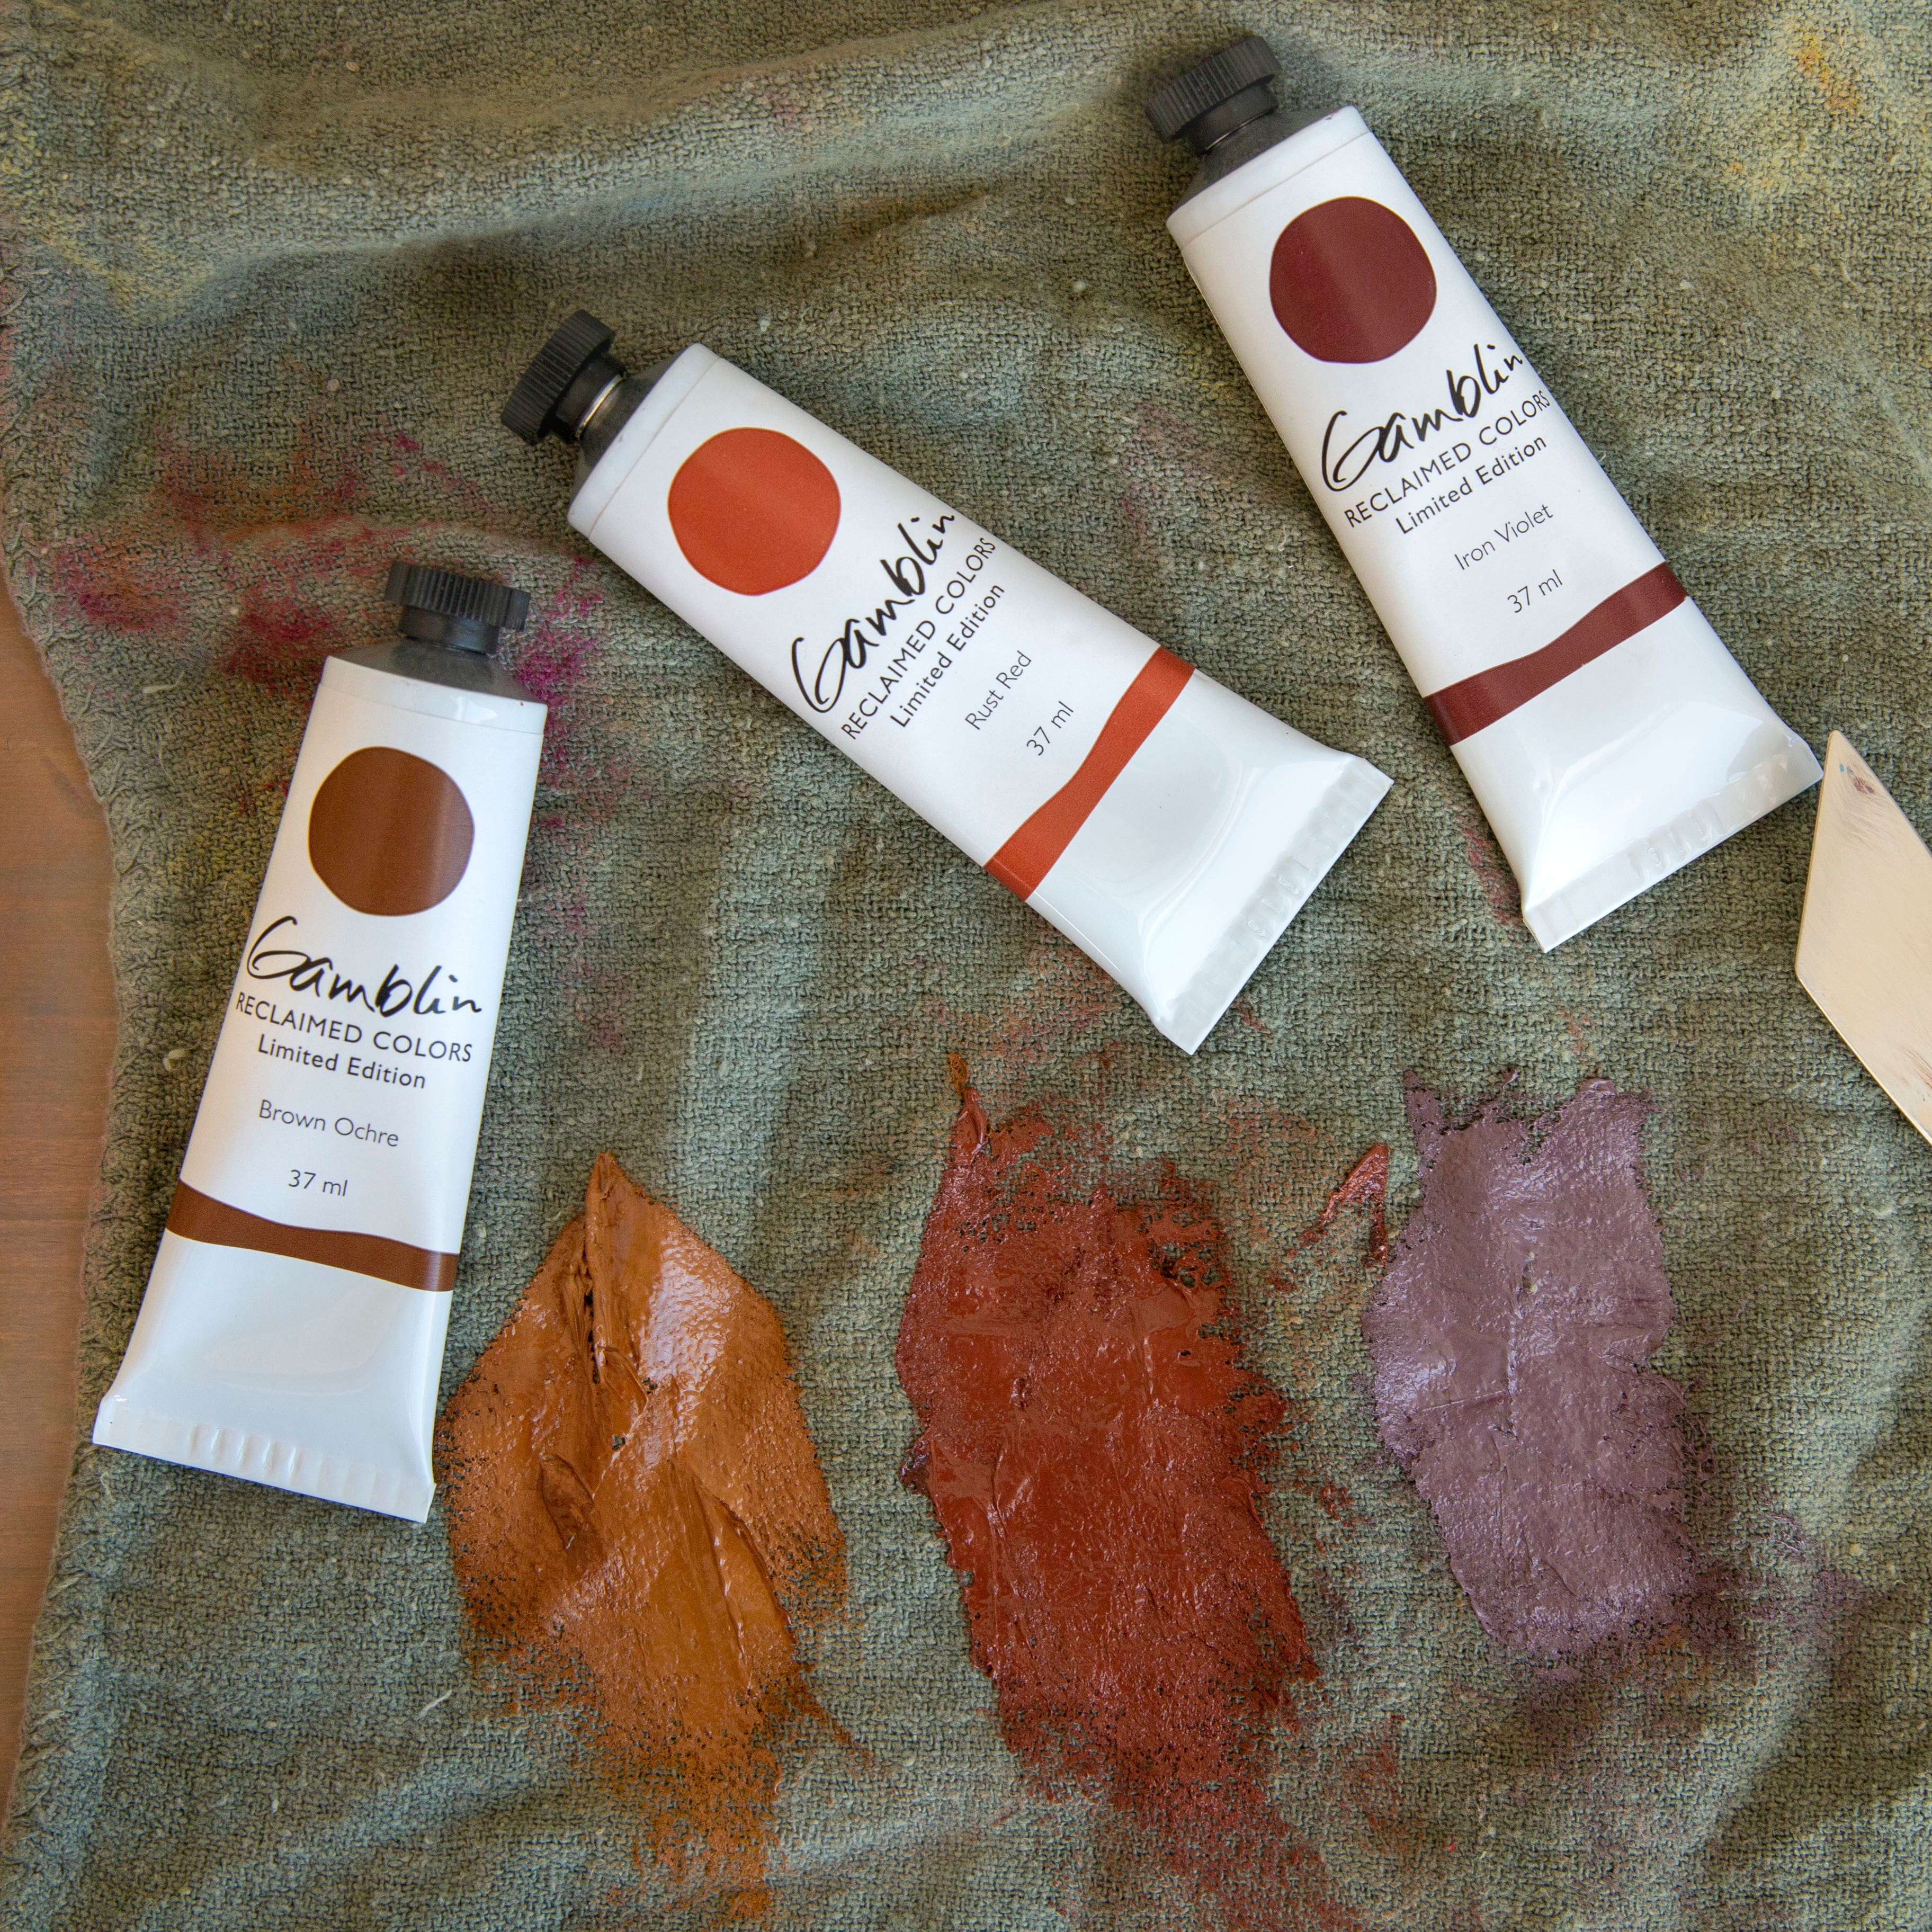 Gamblin Reclaimed Earth Colors Limited Edition Oil Color Set